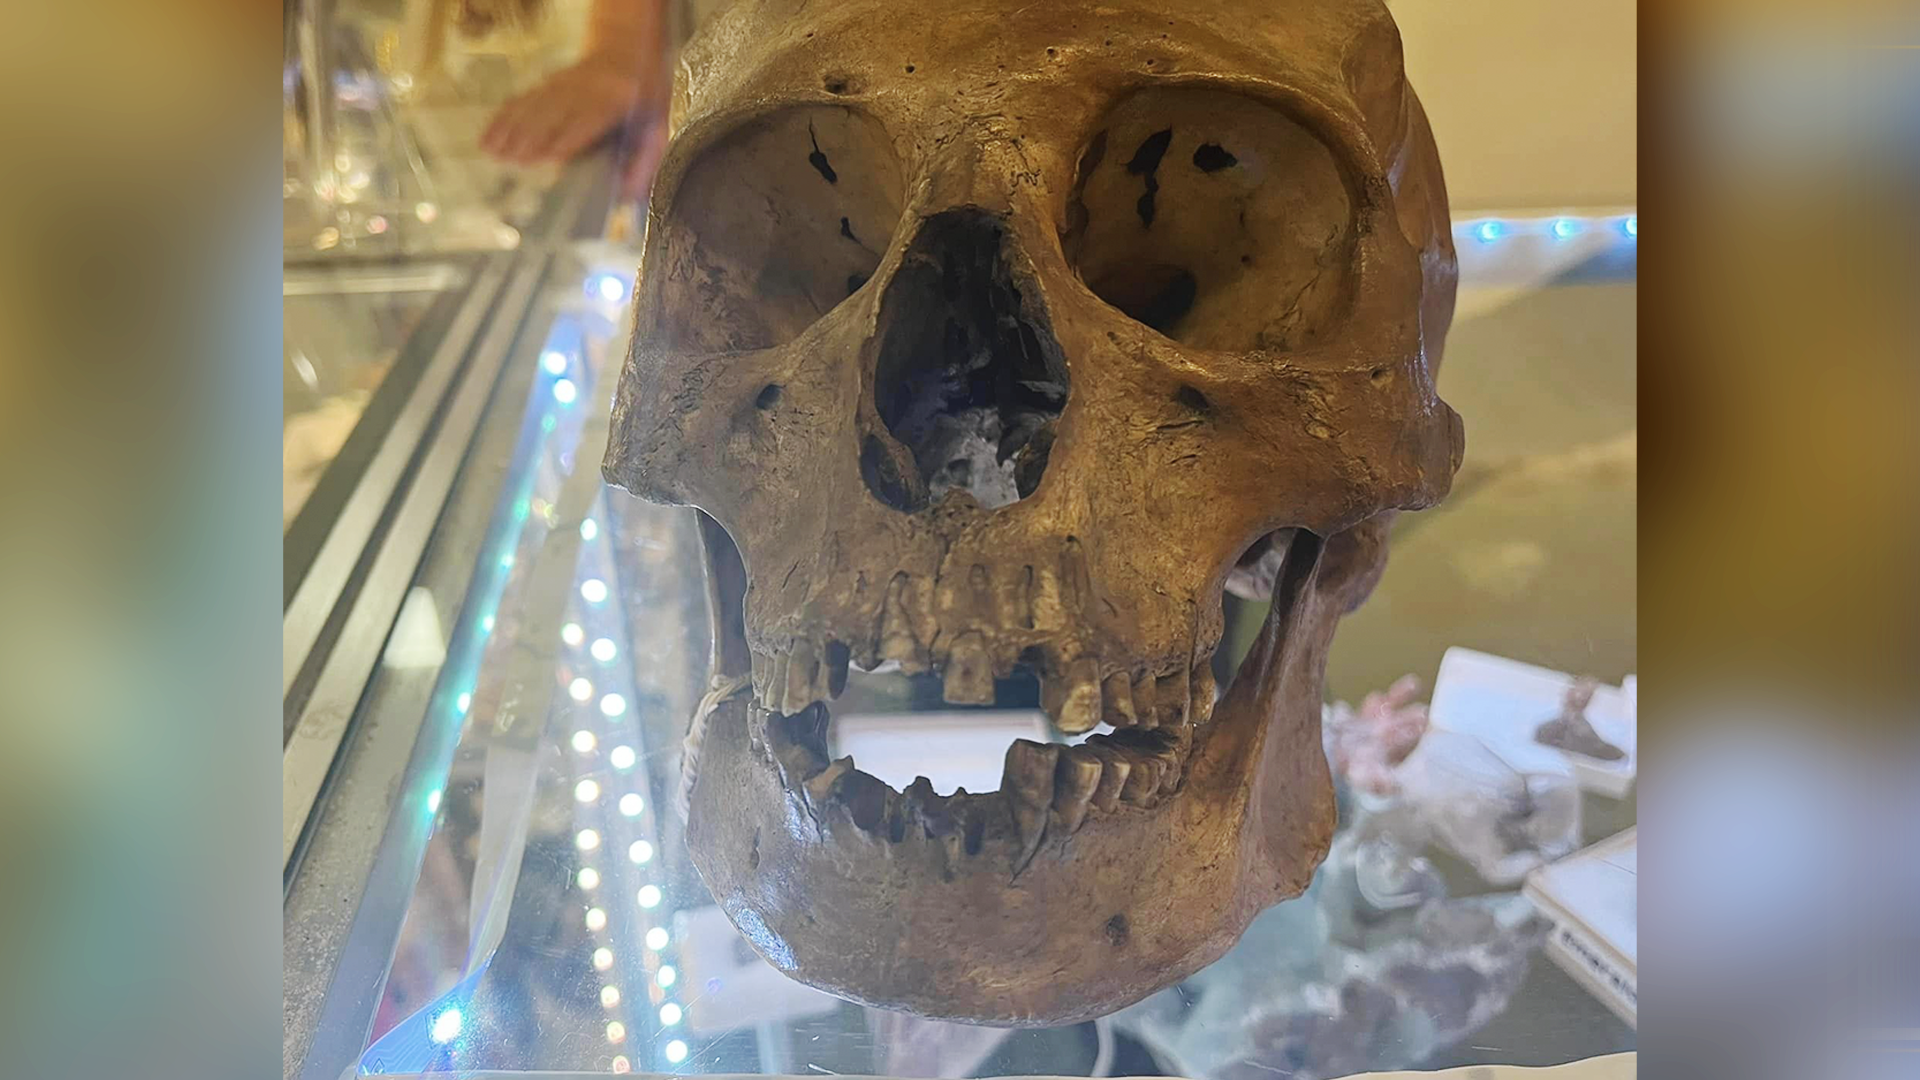 Anthropologist discovers human skull in Florida thrift store